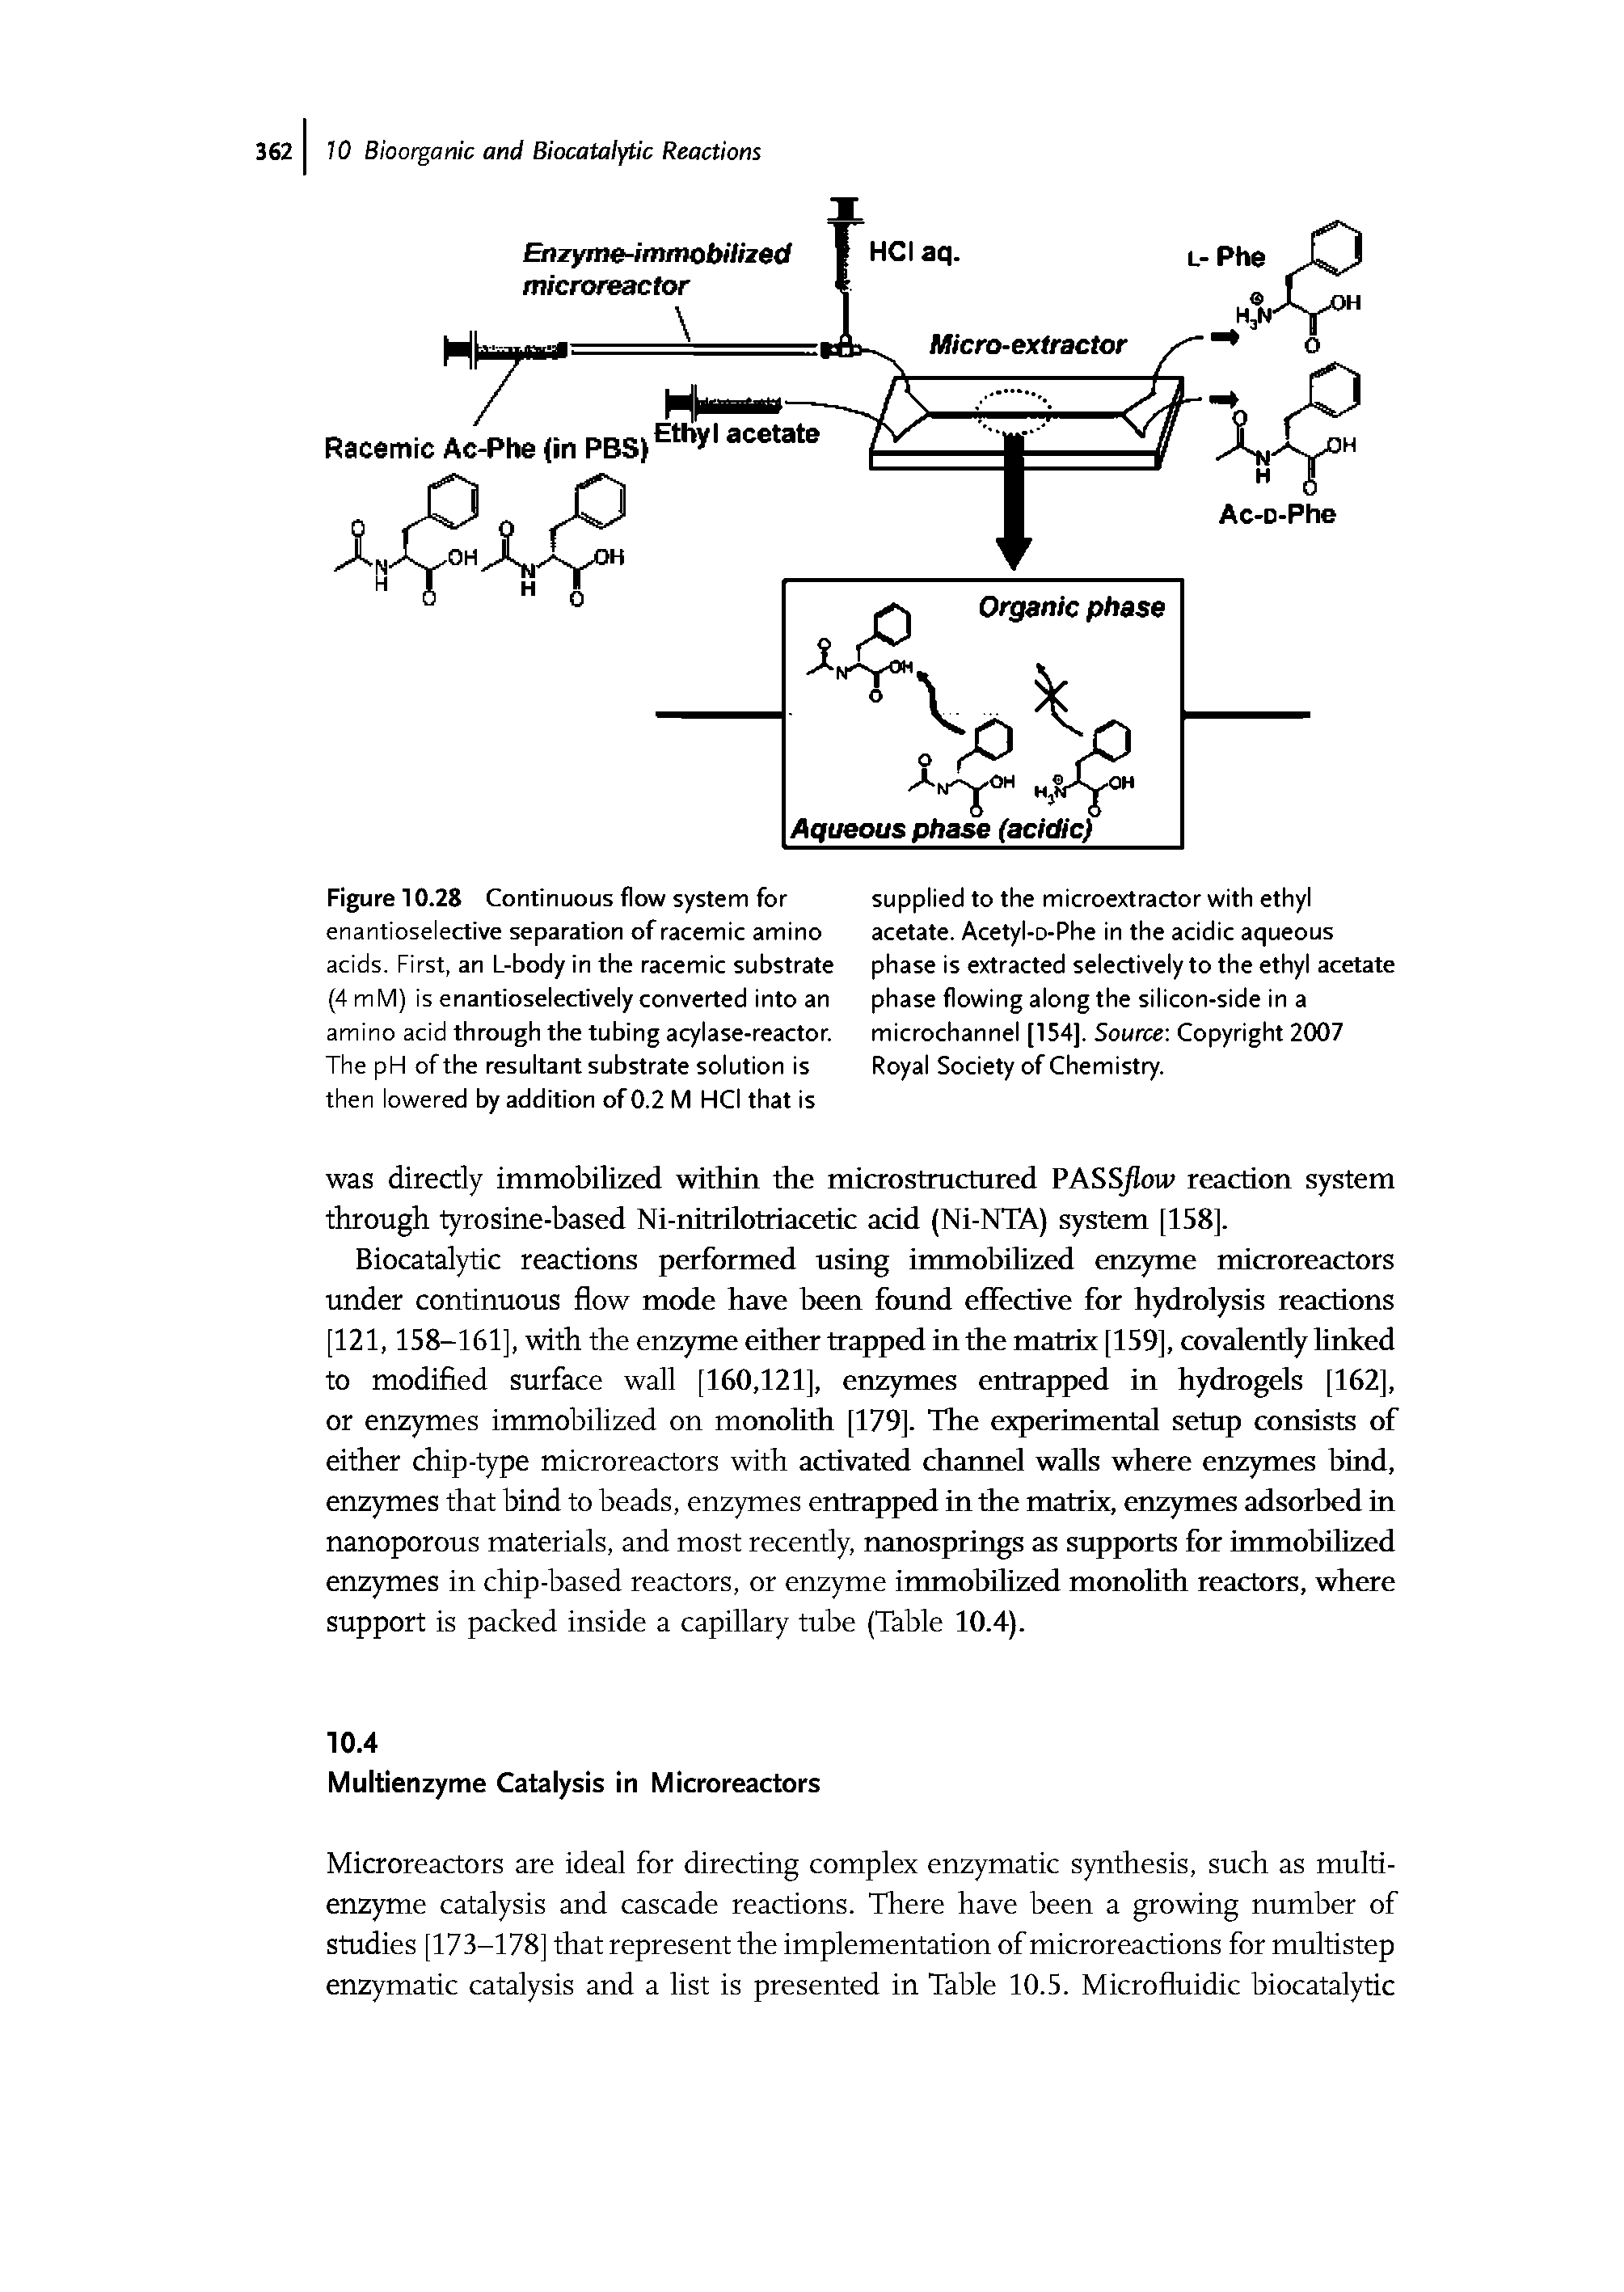 Figure 10.28 Continuous flow system for enantioselective separation of racemic amino acids. First, an L-body in the racemic substrate (4 mM) is enantioselectively converted into an amino acid through the tubing acylase-reactor. The pH of the resultant substrate solution is then lowered by addition of 0.2 M HCI that is...